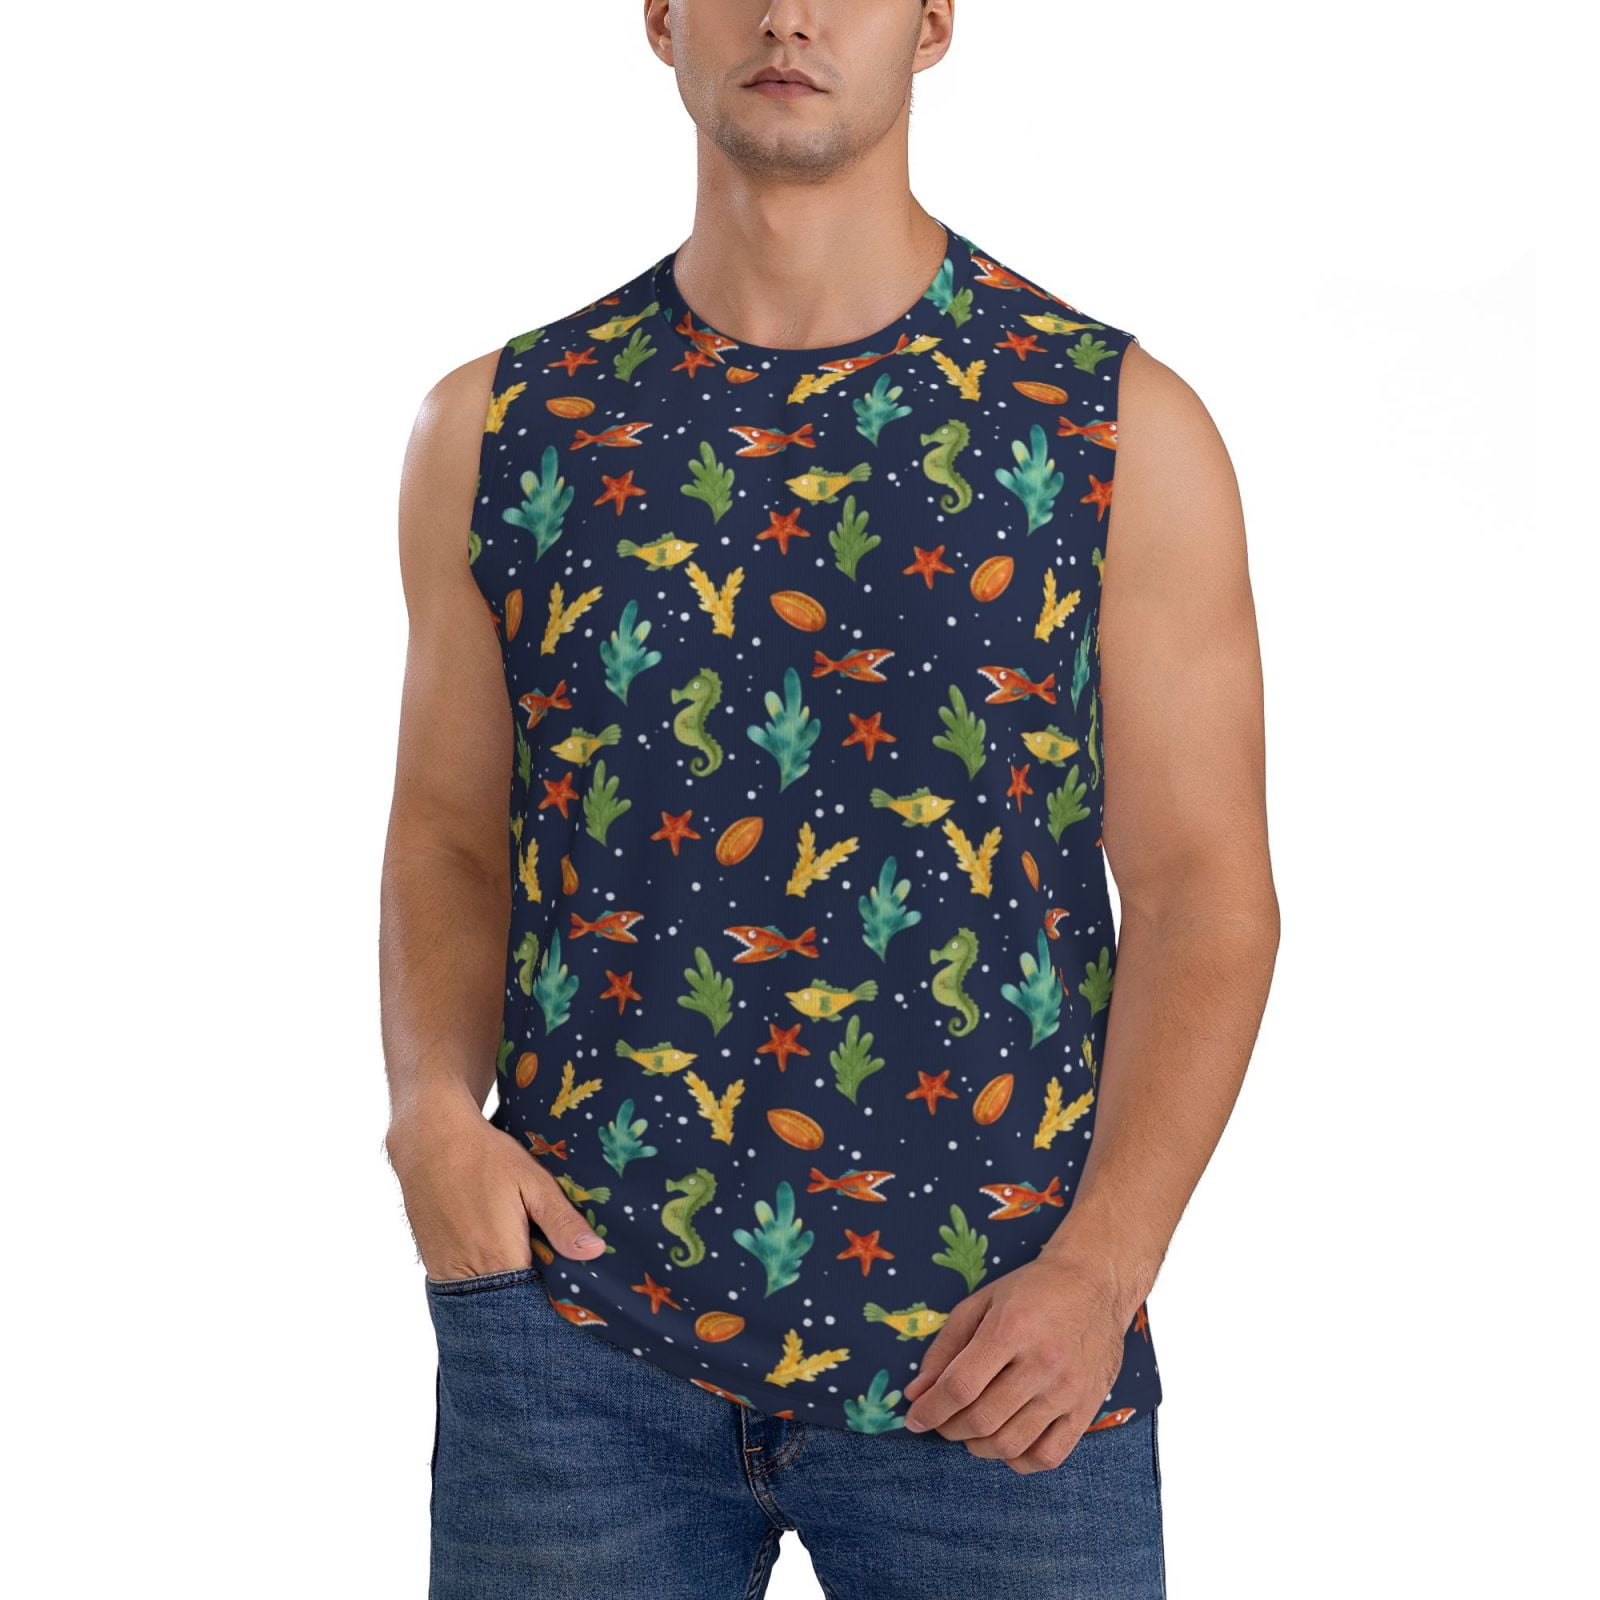 Adobk Shells And Seaweed Men'S Tank Top Muscle Workout Gym Shirts ...